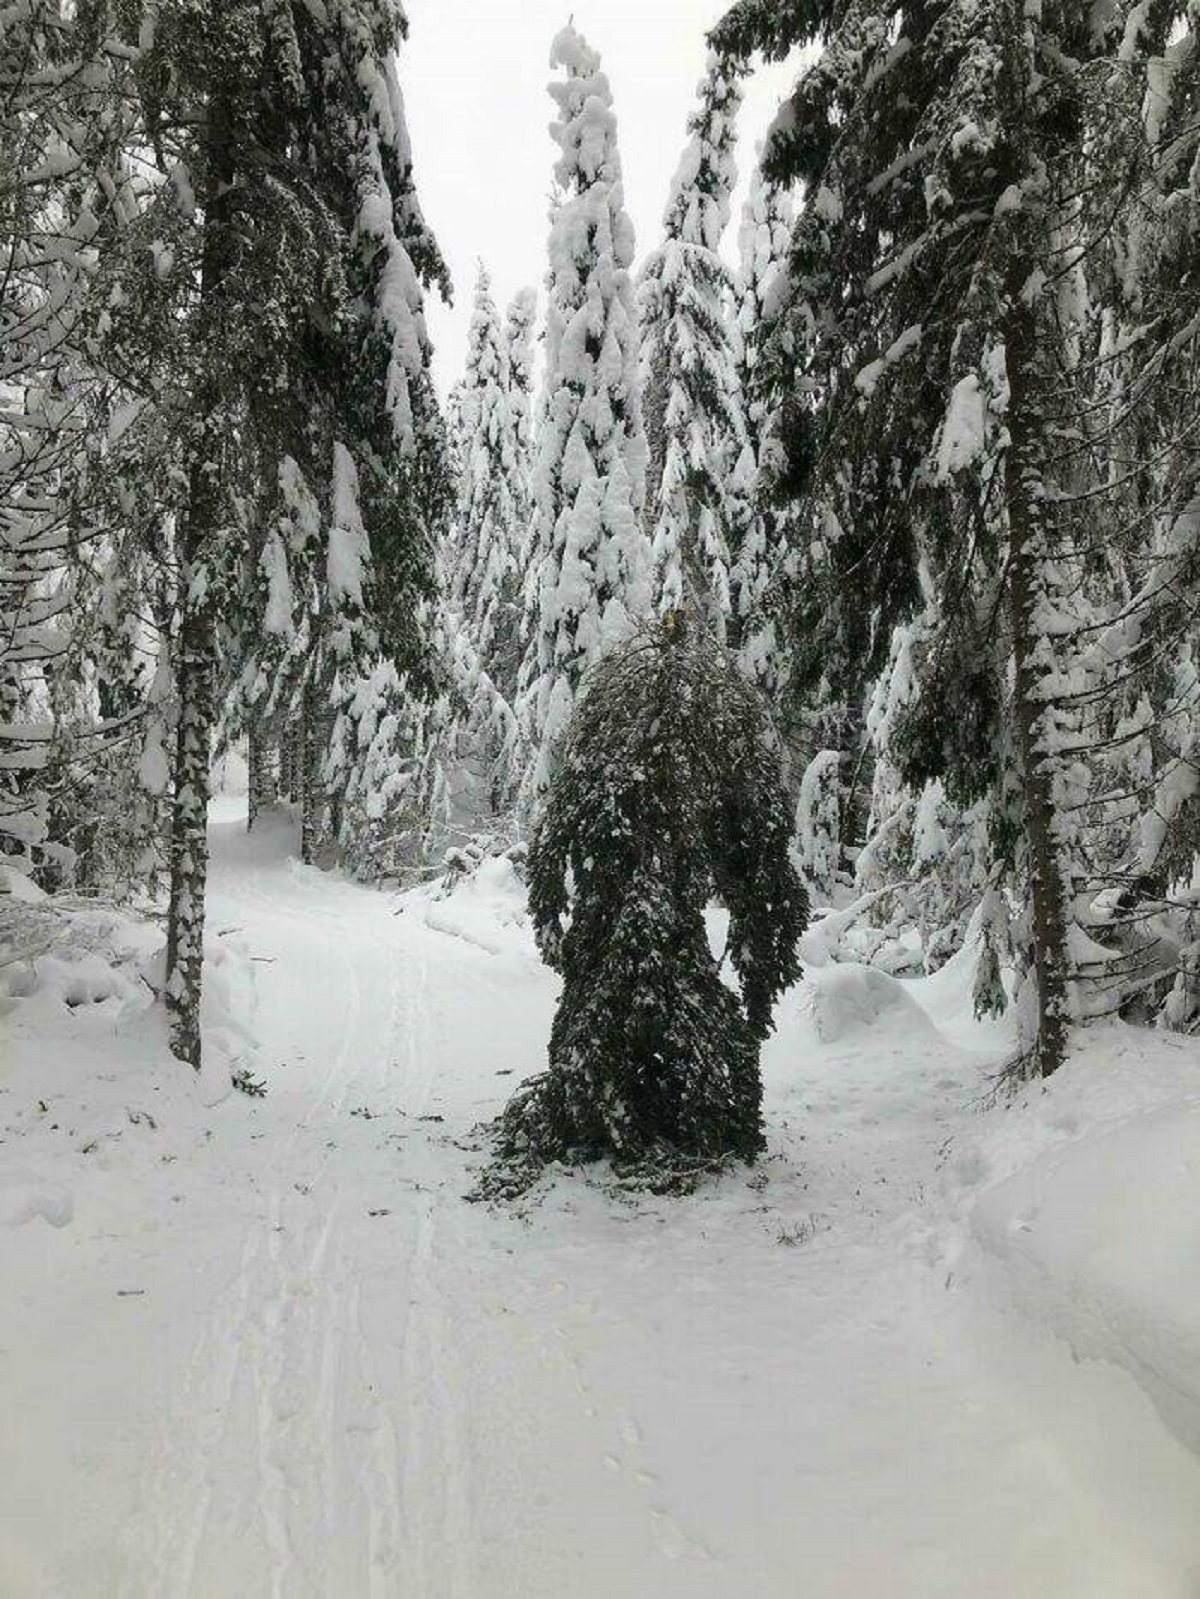 "I Freaked Out A Little When I Met This While Cross Country Skiing"